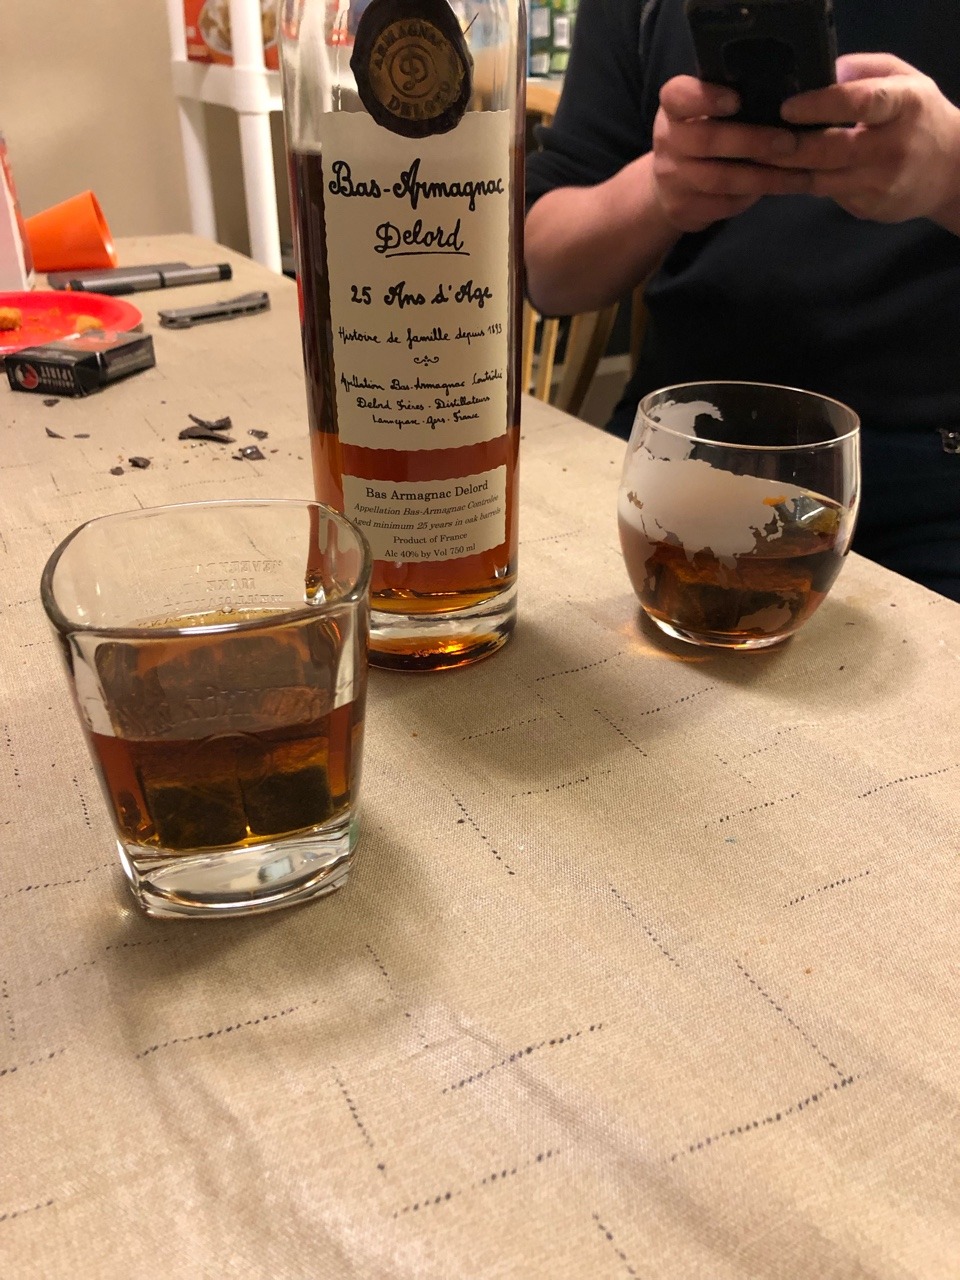 Cheers everyone! Roomy and I are cracking open a bottle of 25 year old French Brandy